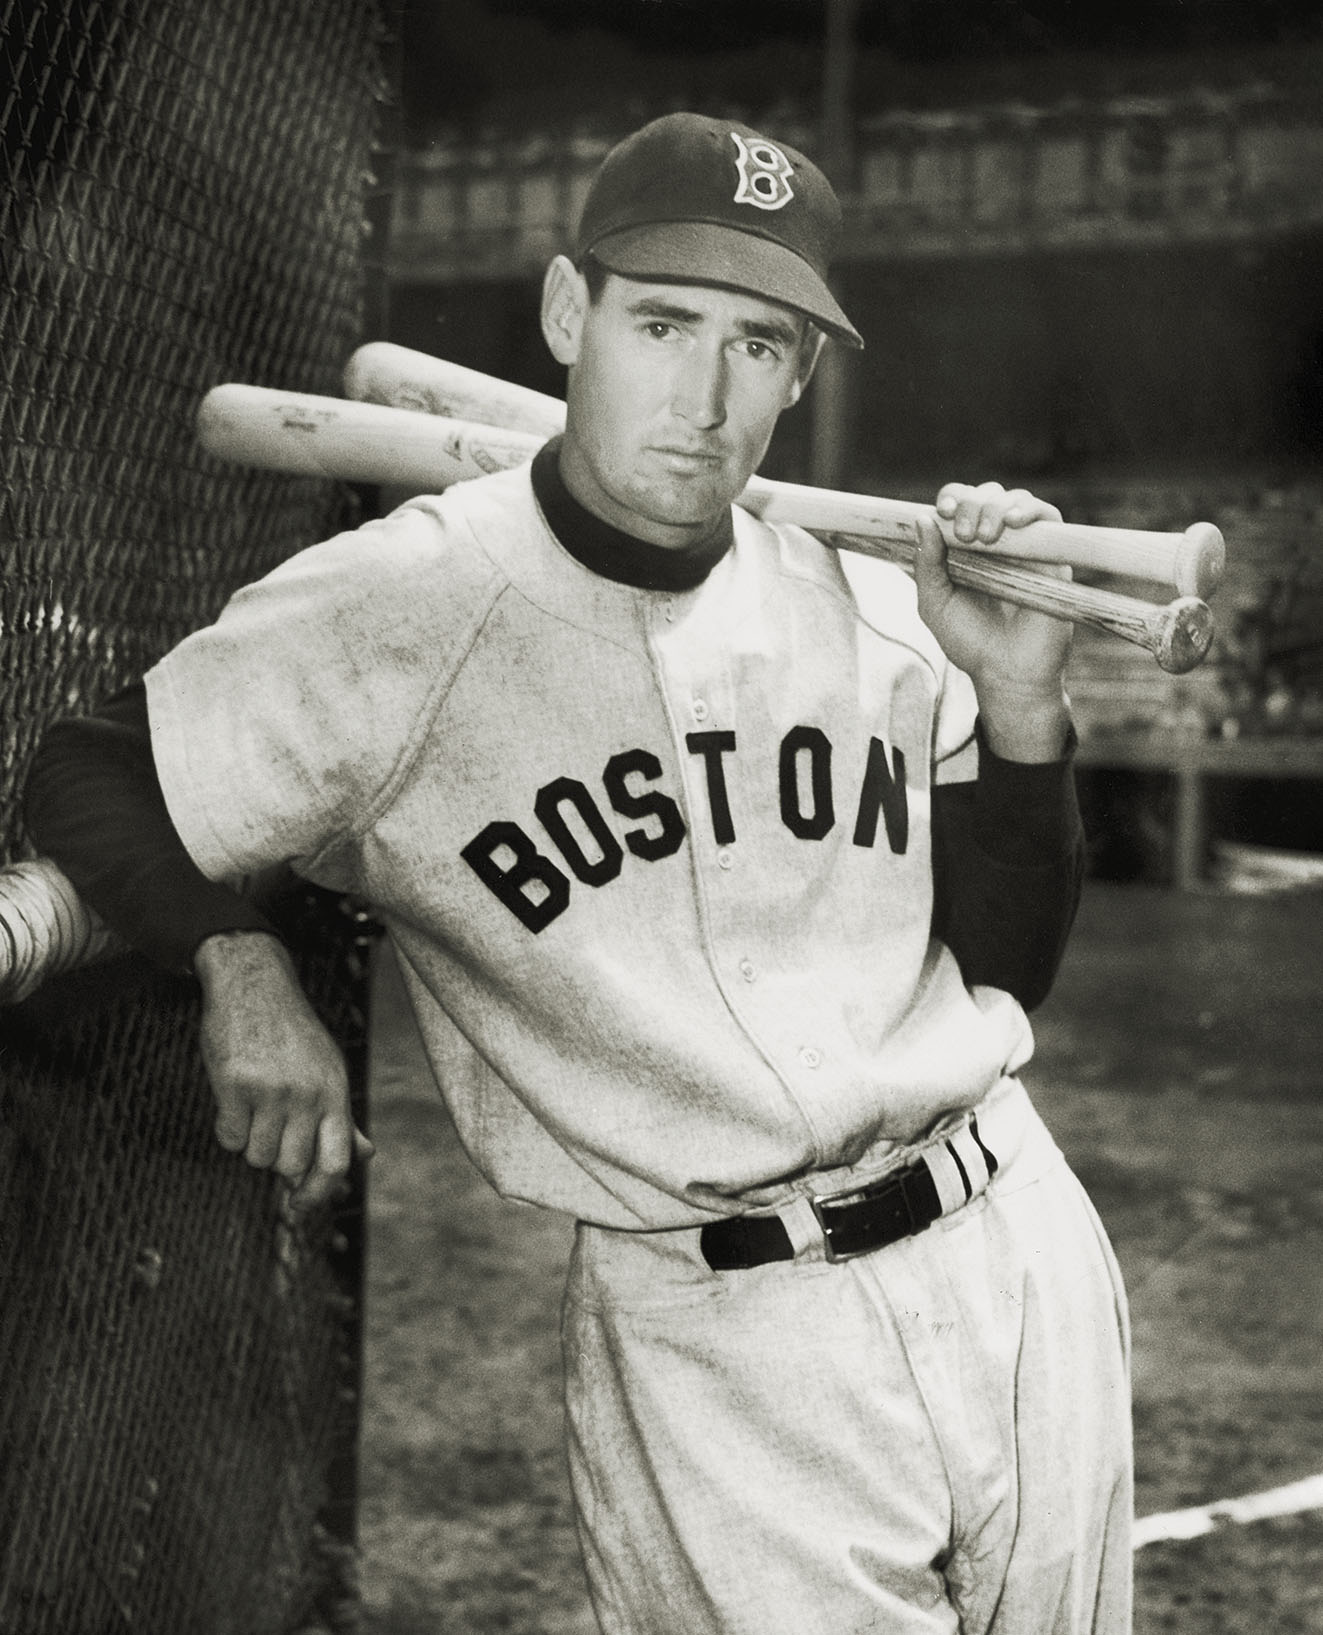 Williams rejoined the Red Sox at the start of the 1946 season, the first year he was named team MVP. / Bettman Getty Images